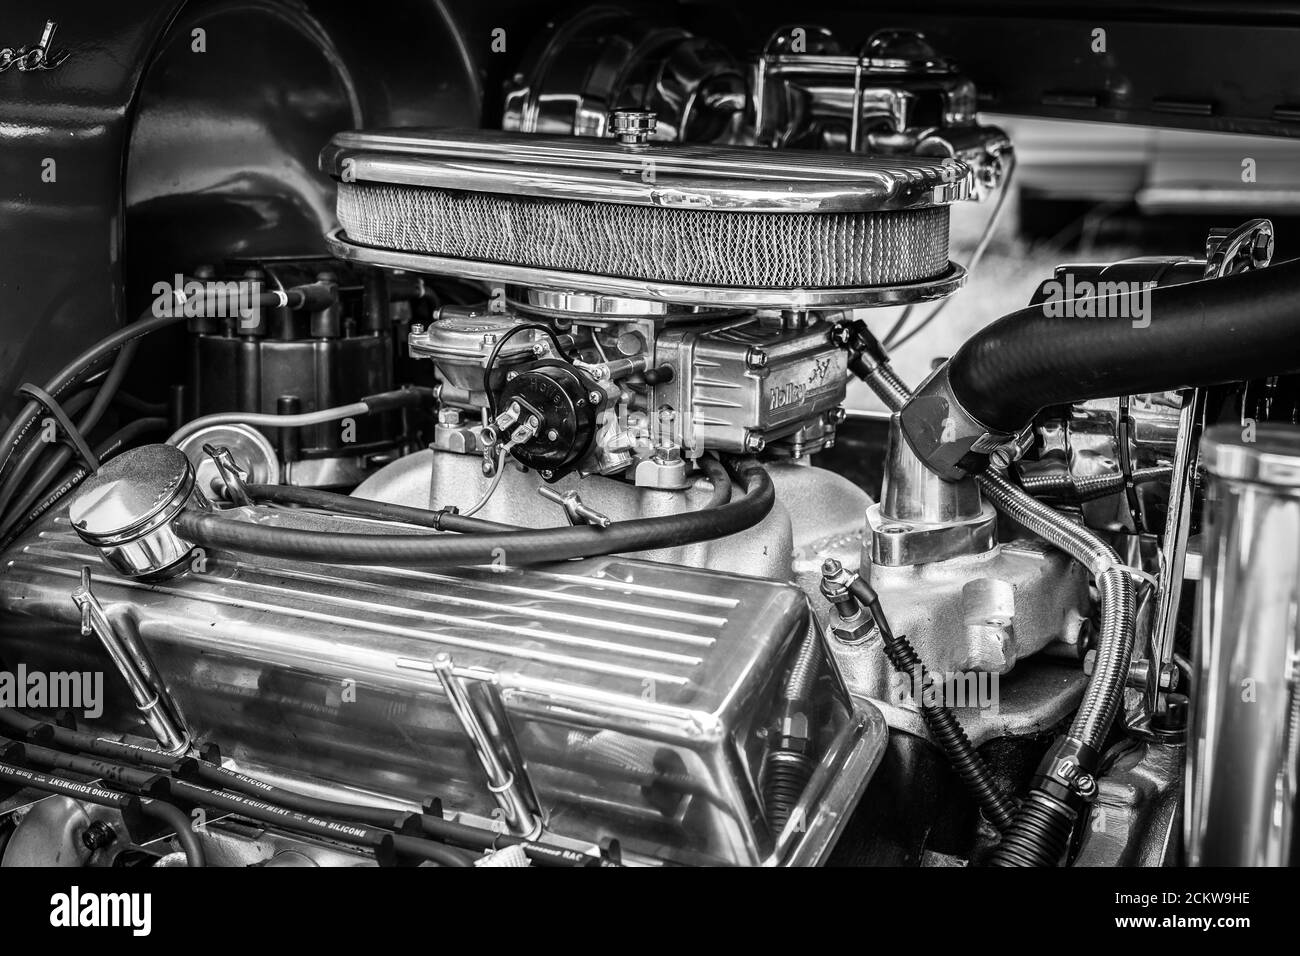 DIEDERSDORF, GERMANY - AUGUST 30, 2020: The engine of vintage car Chevrolet, 1930. Black and white. The exhibition of 'US Car Classics'. Stock Photo